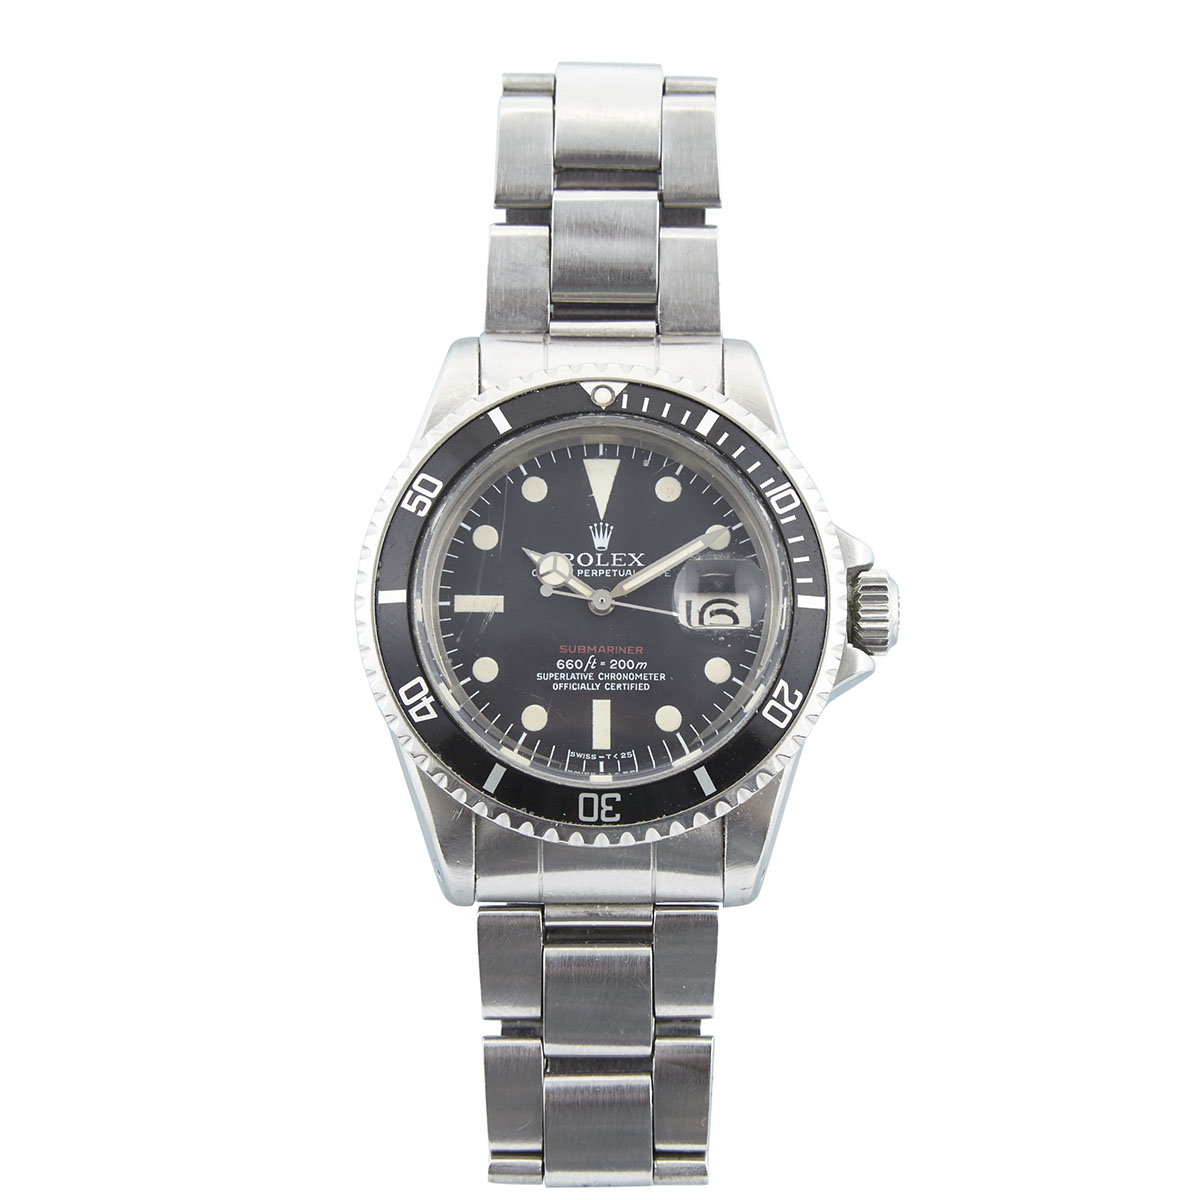 Rolex Submariner Oyster Perpetual Date Wristwatch